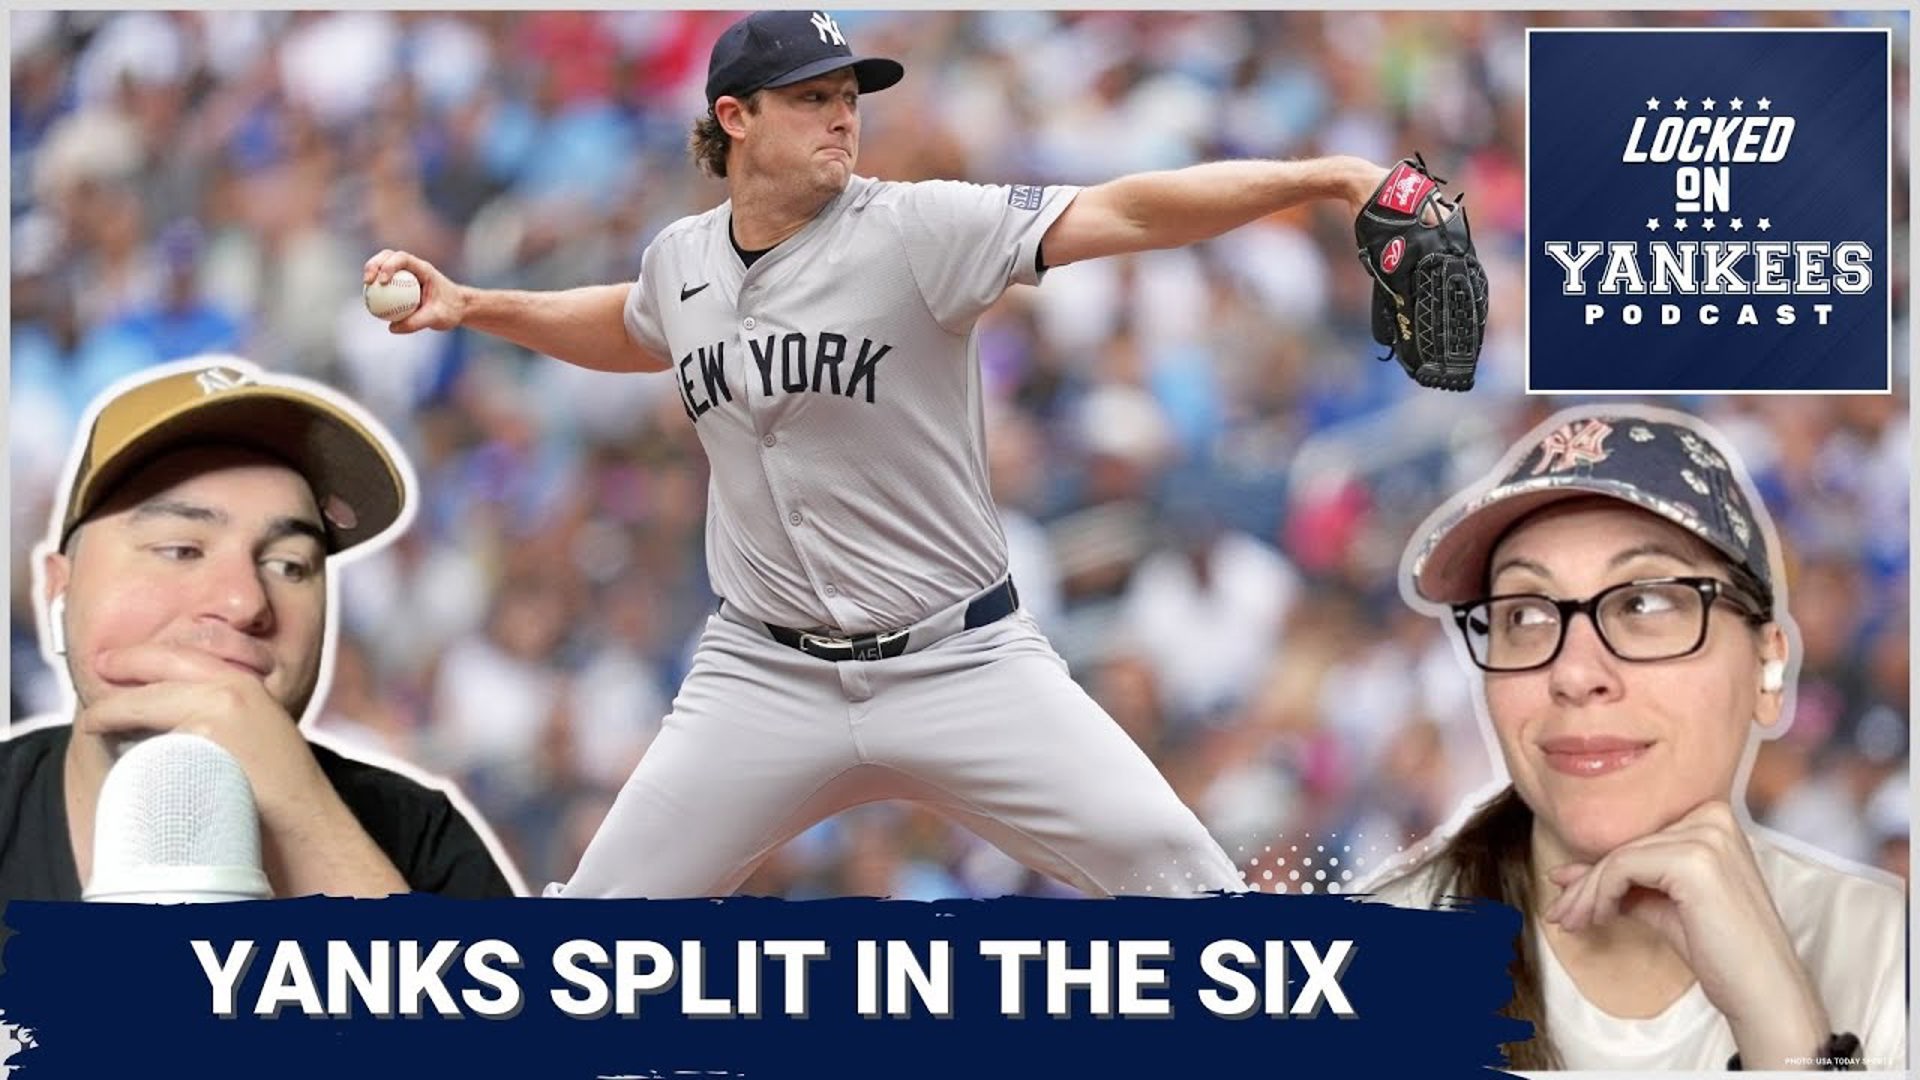 The New York Yankees earned a split over the weekend with the Toronto Blue Jays.